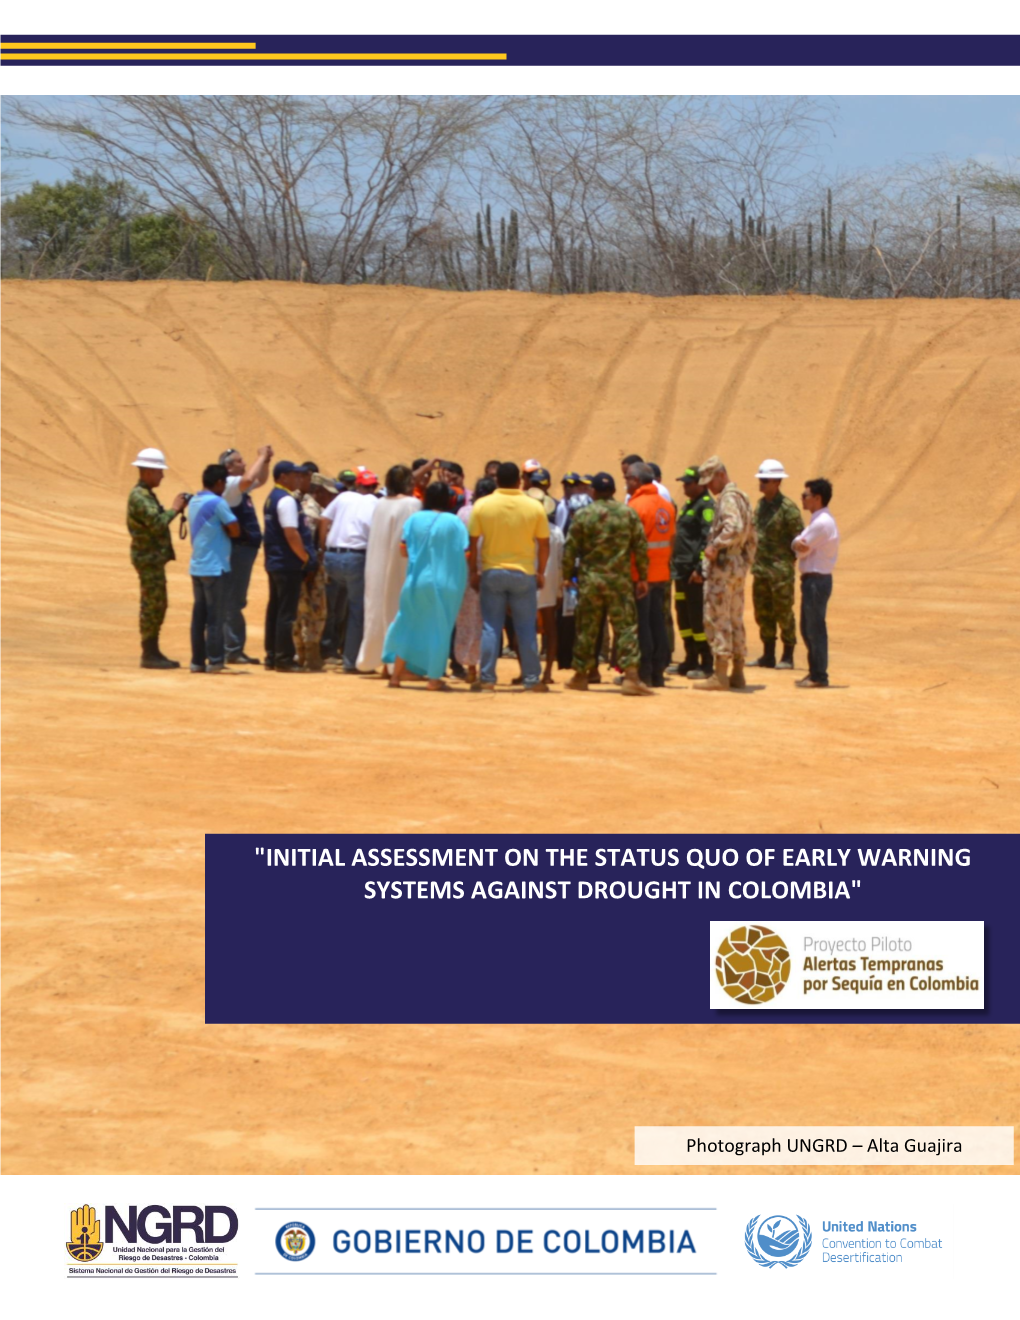 "Initial Assessment on the Status Quo of Early Warning Systems Against Drought in Colombia"